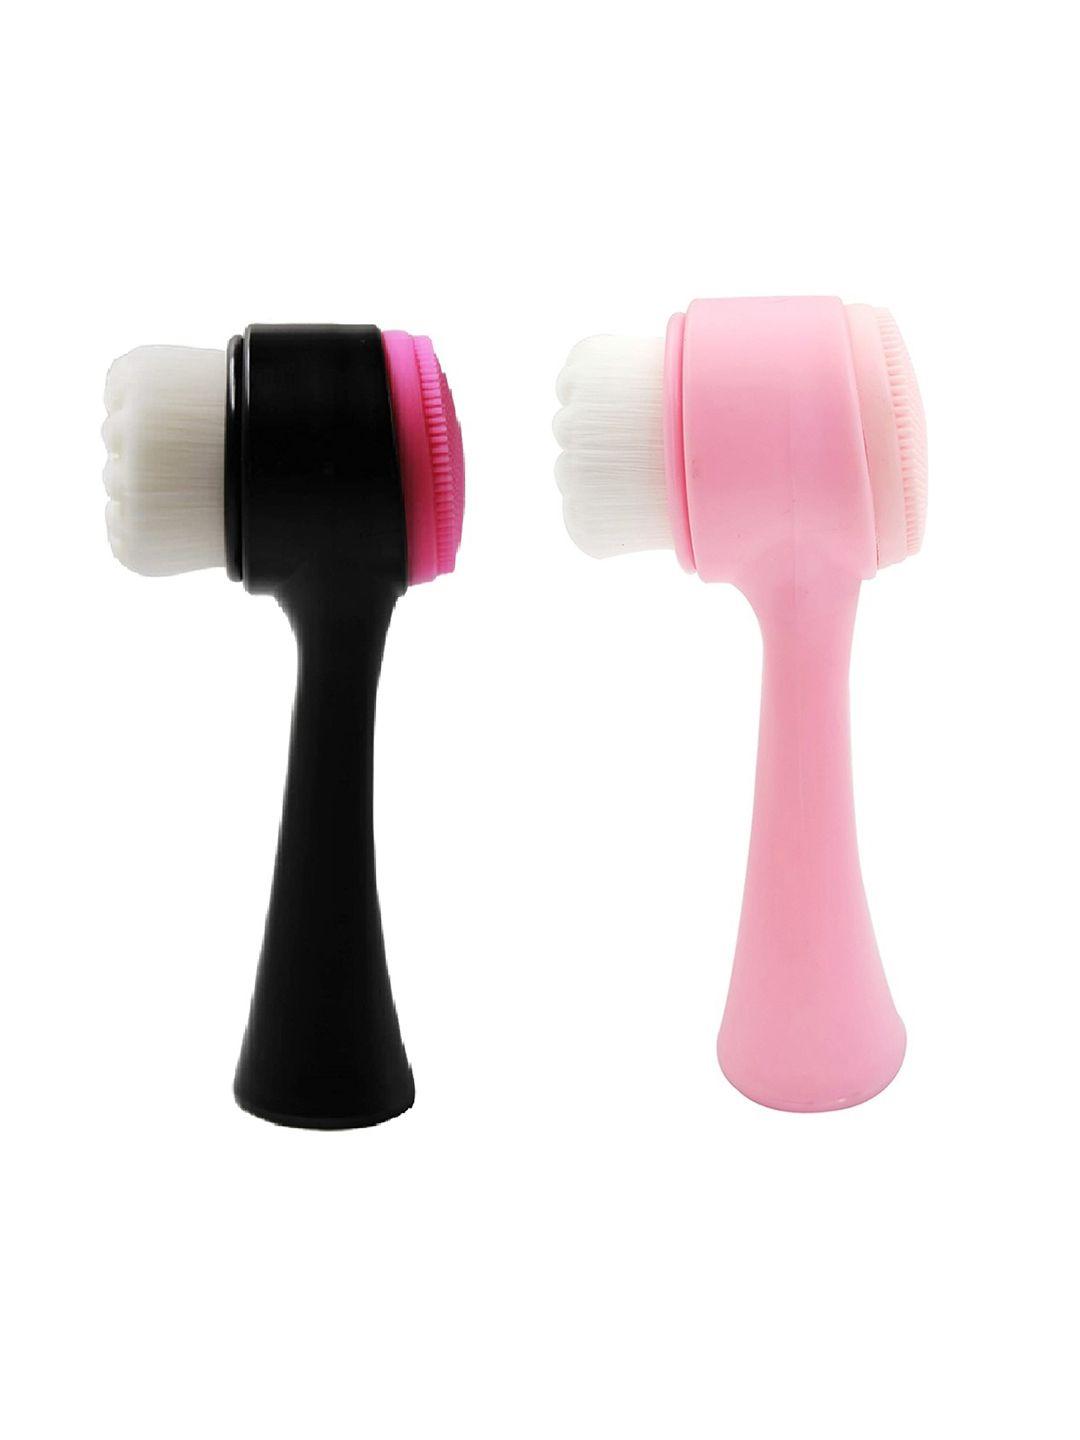 majestique set of 2 pink & blue facial cleansing brushes